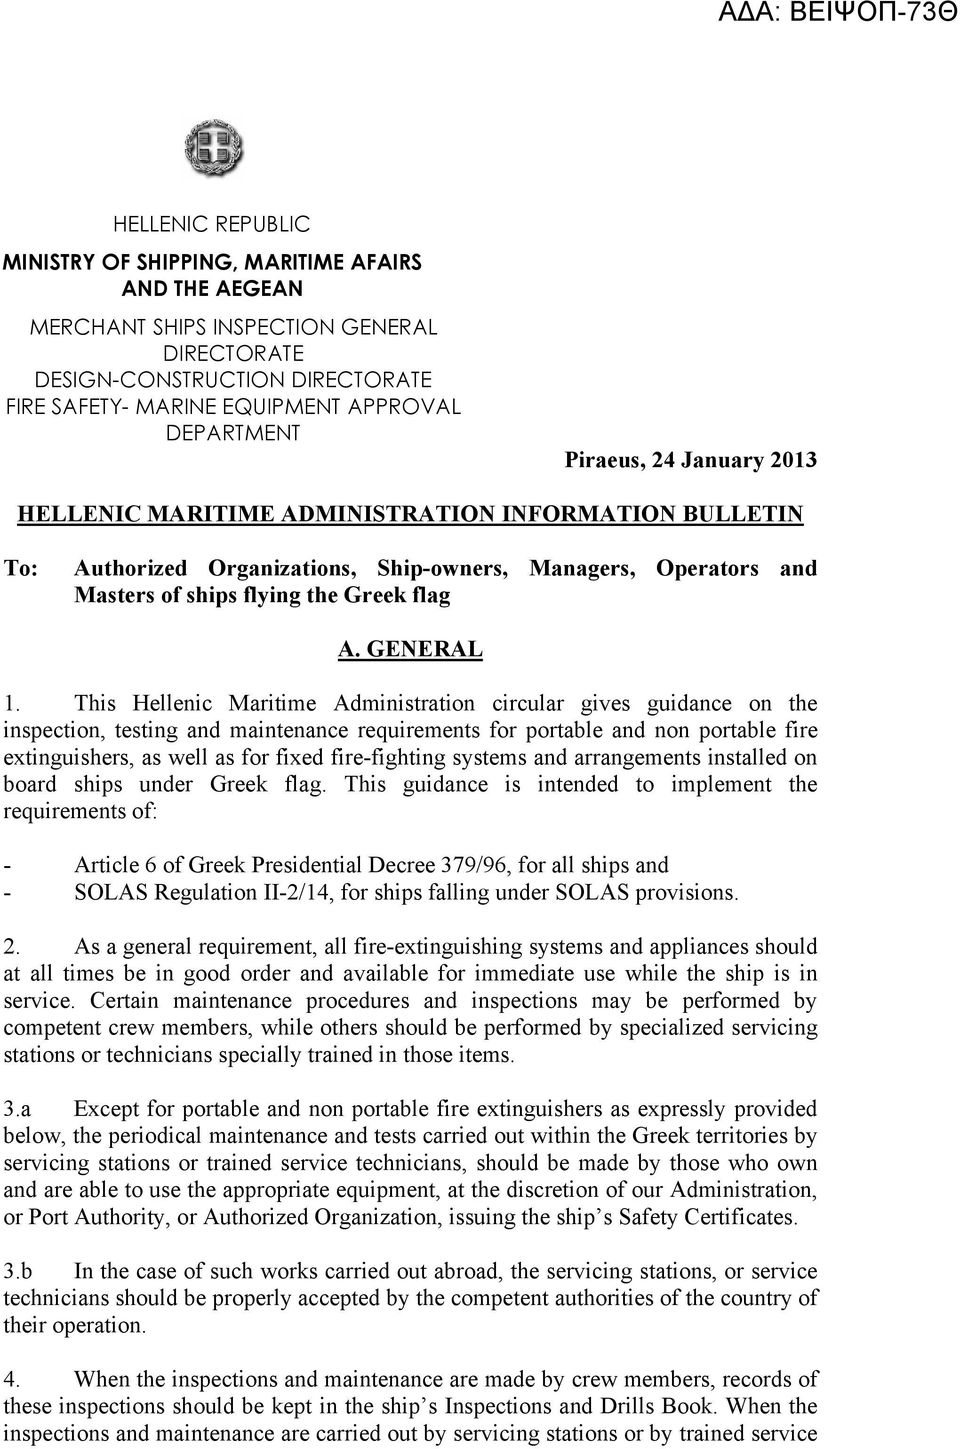 This Hellenic Maritime Administration circular gives guidance on the inspection, testing and maintenance requirements for portable and non portable fire extinguishers, as well as for fixed